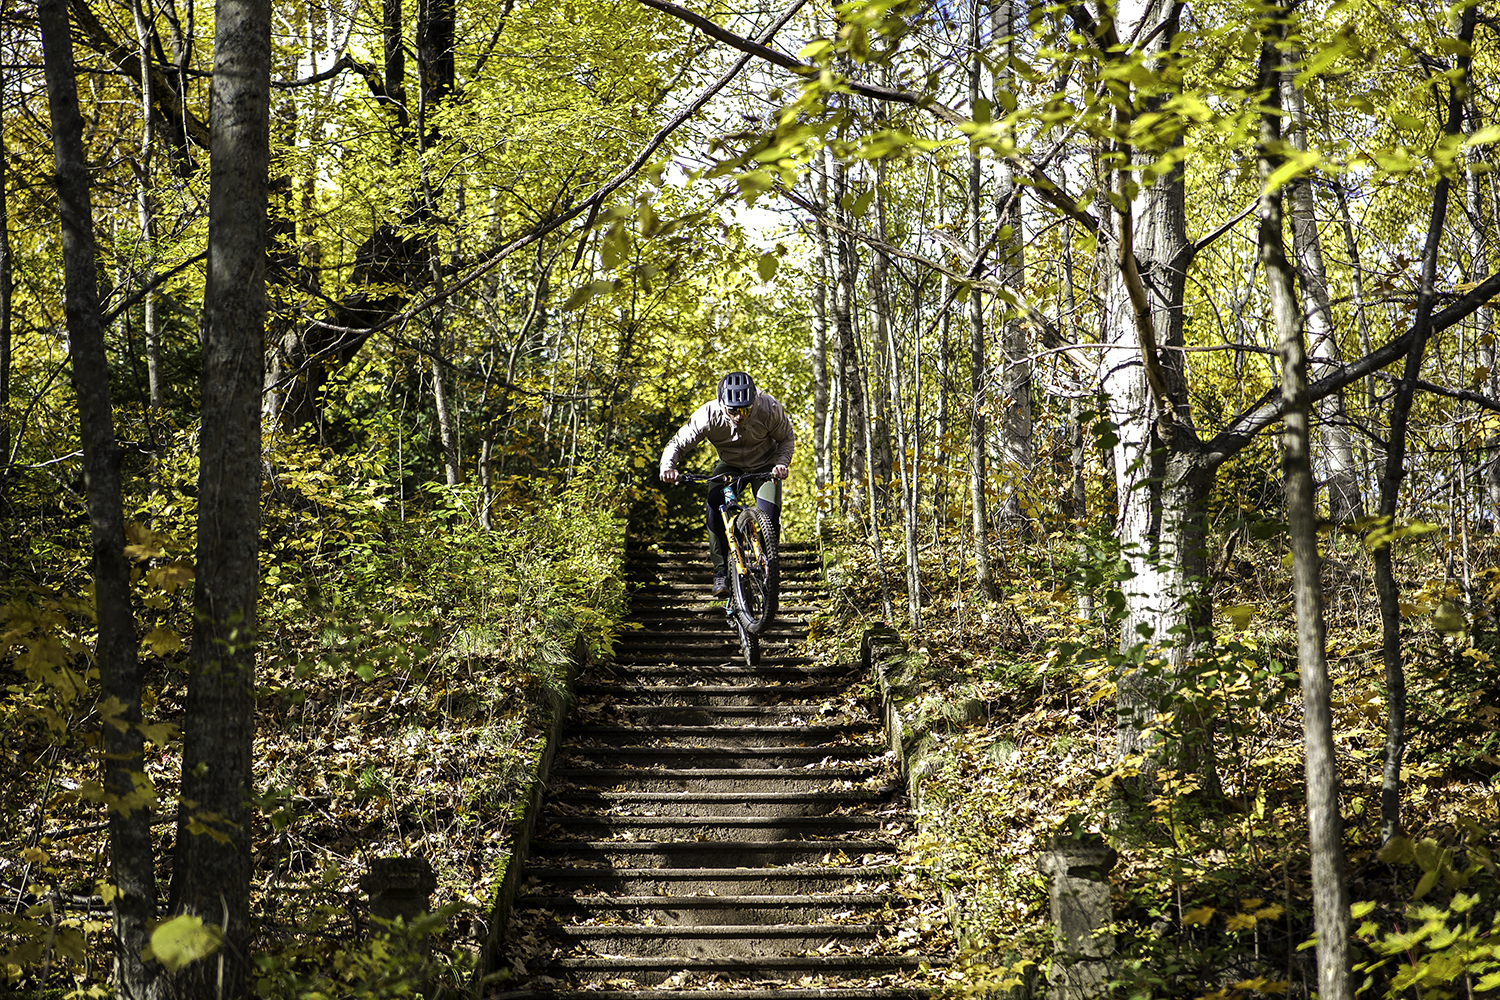 "Brice Shirbach riding down a set of concrete stairs in the woods."